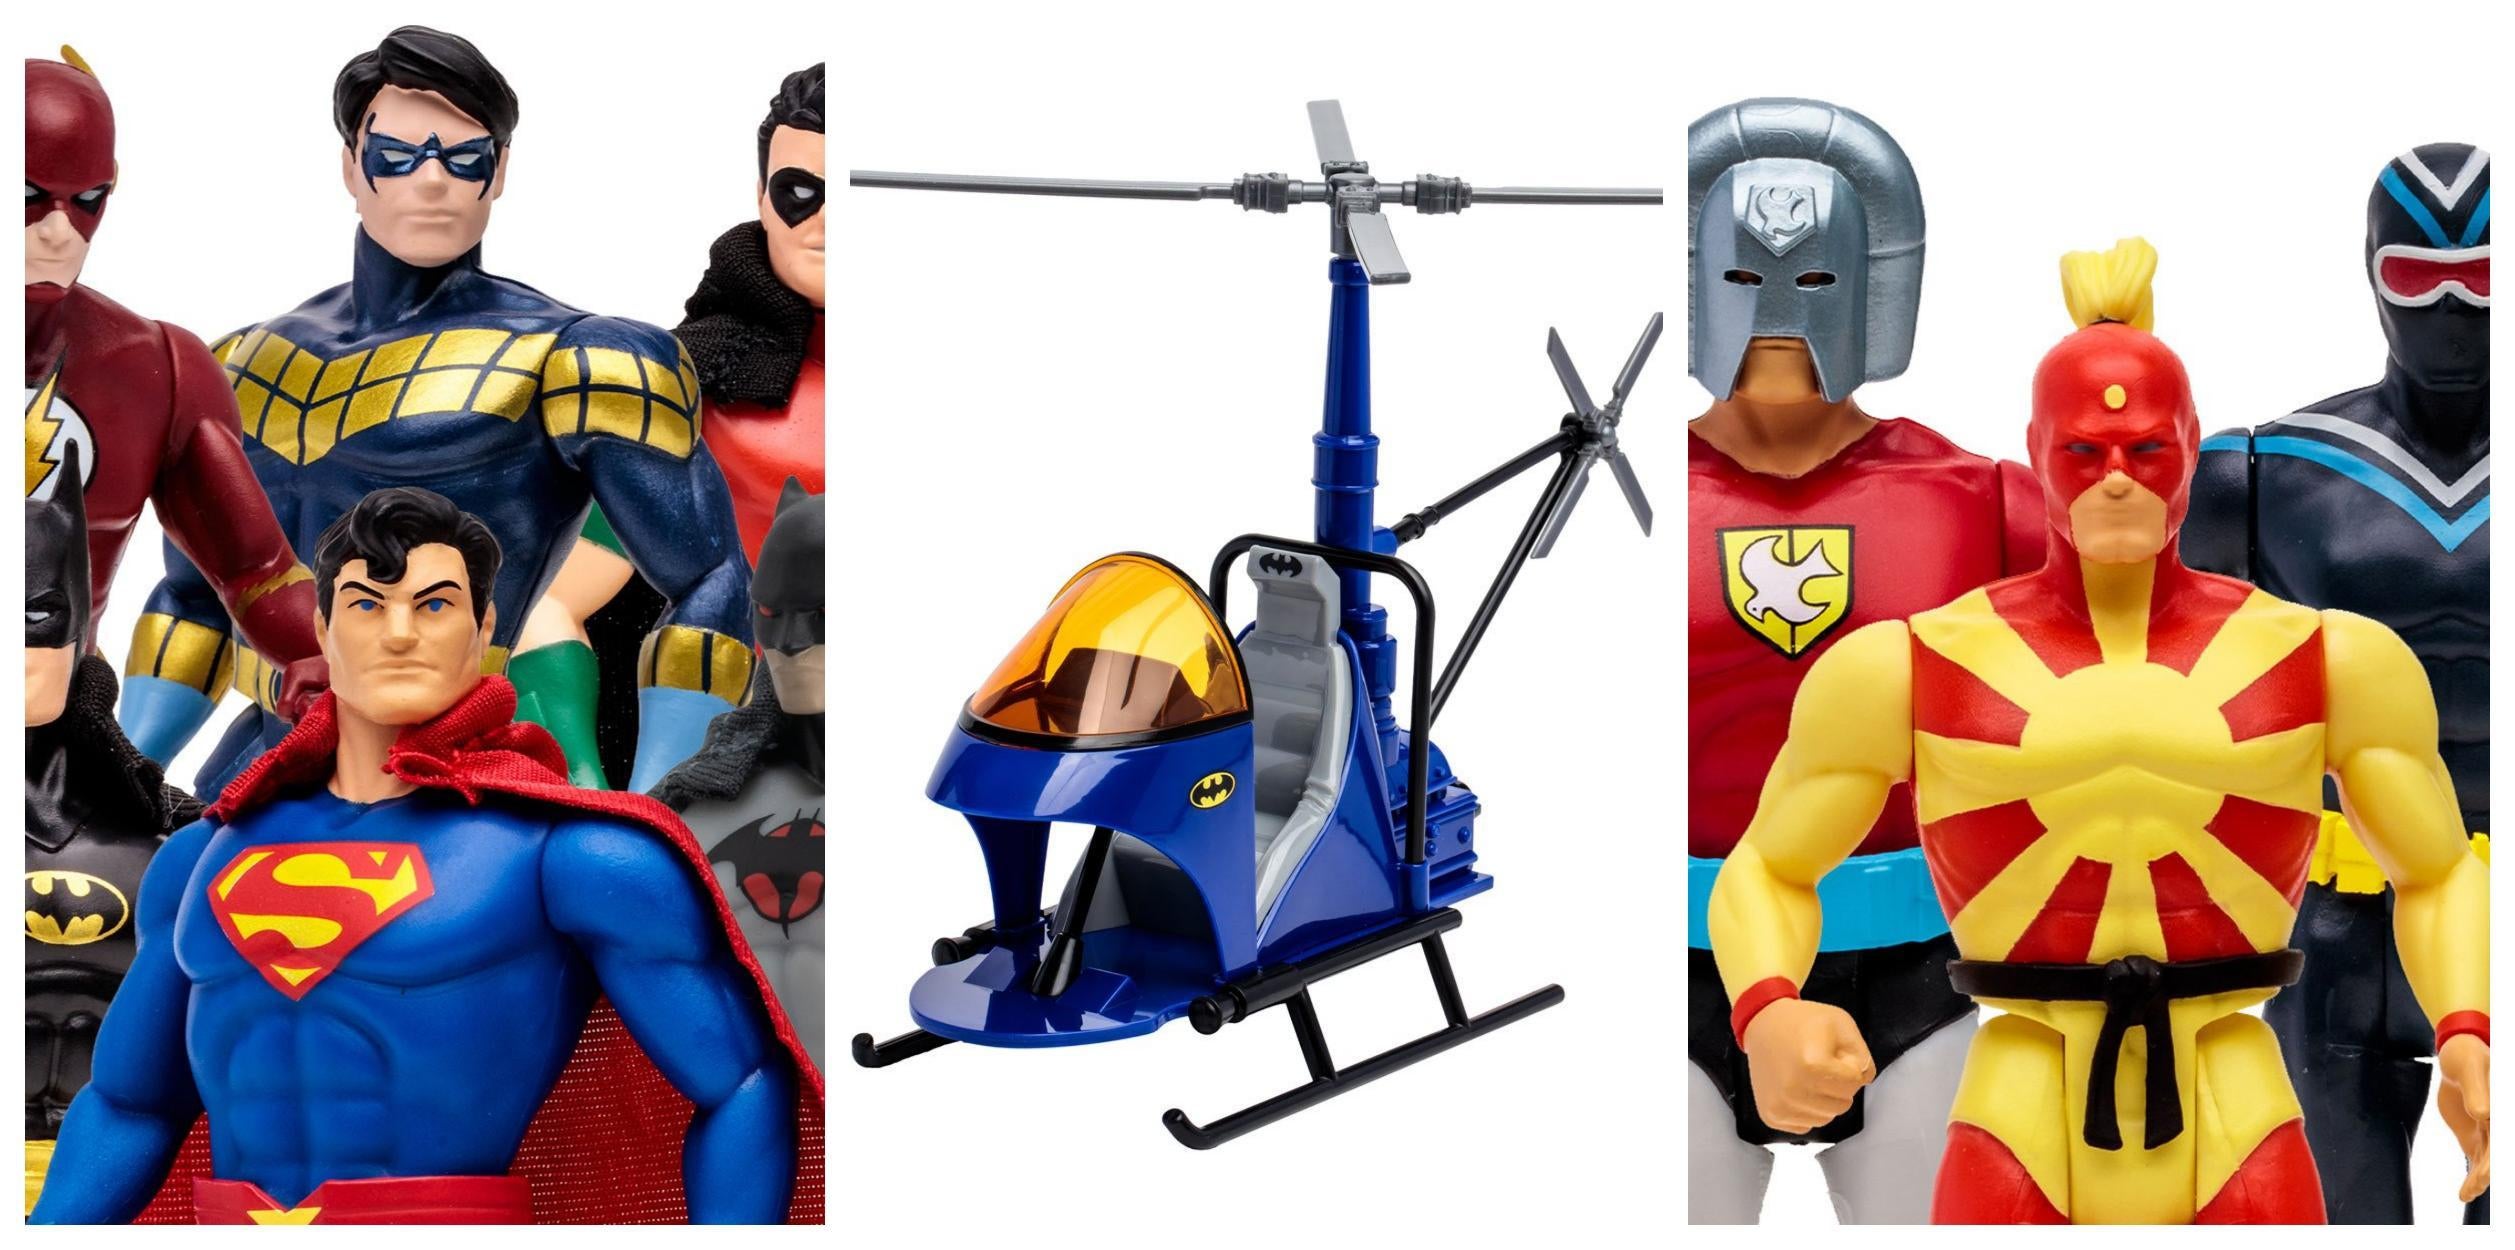 Action Figures in Toy Store Editorial Stock Photo - Image of super